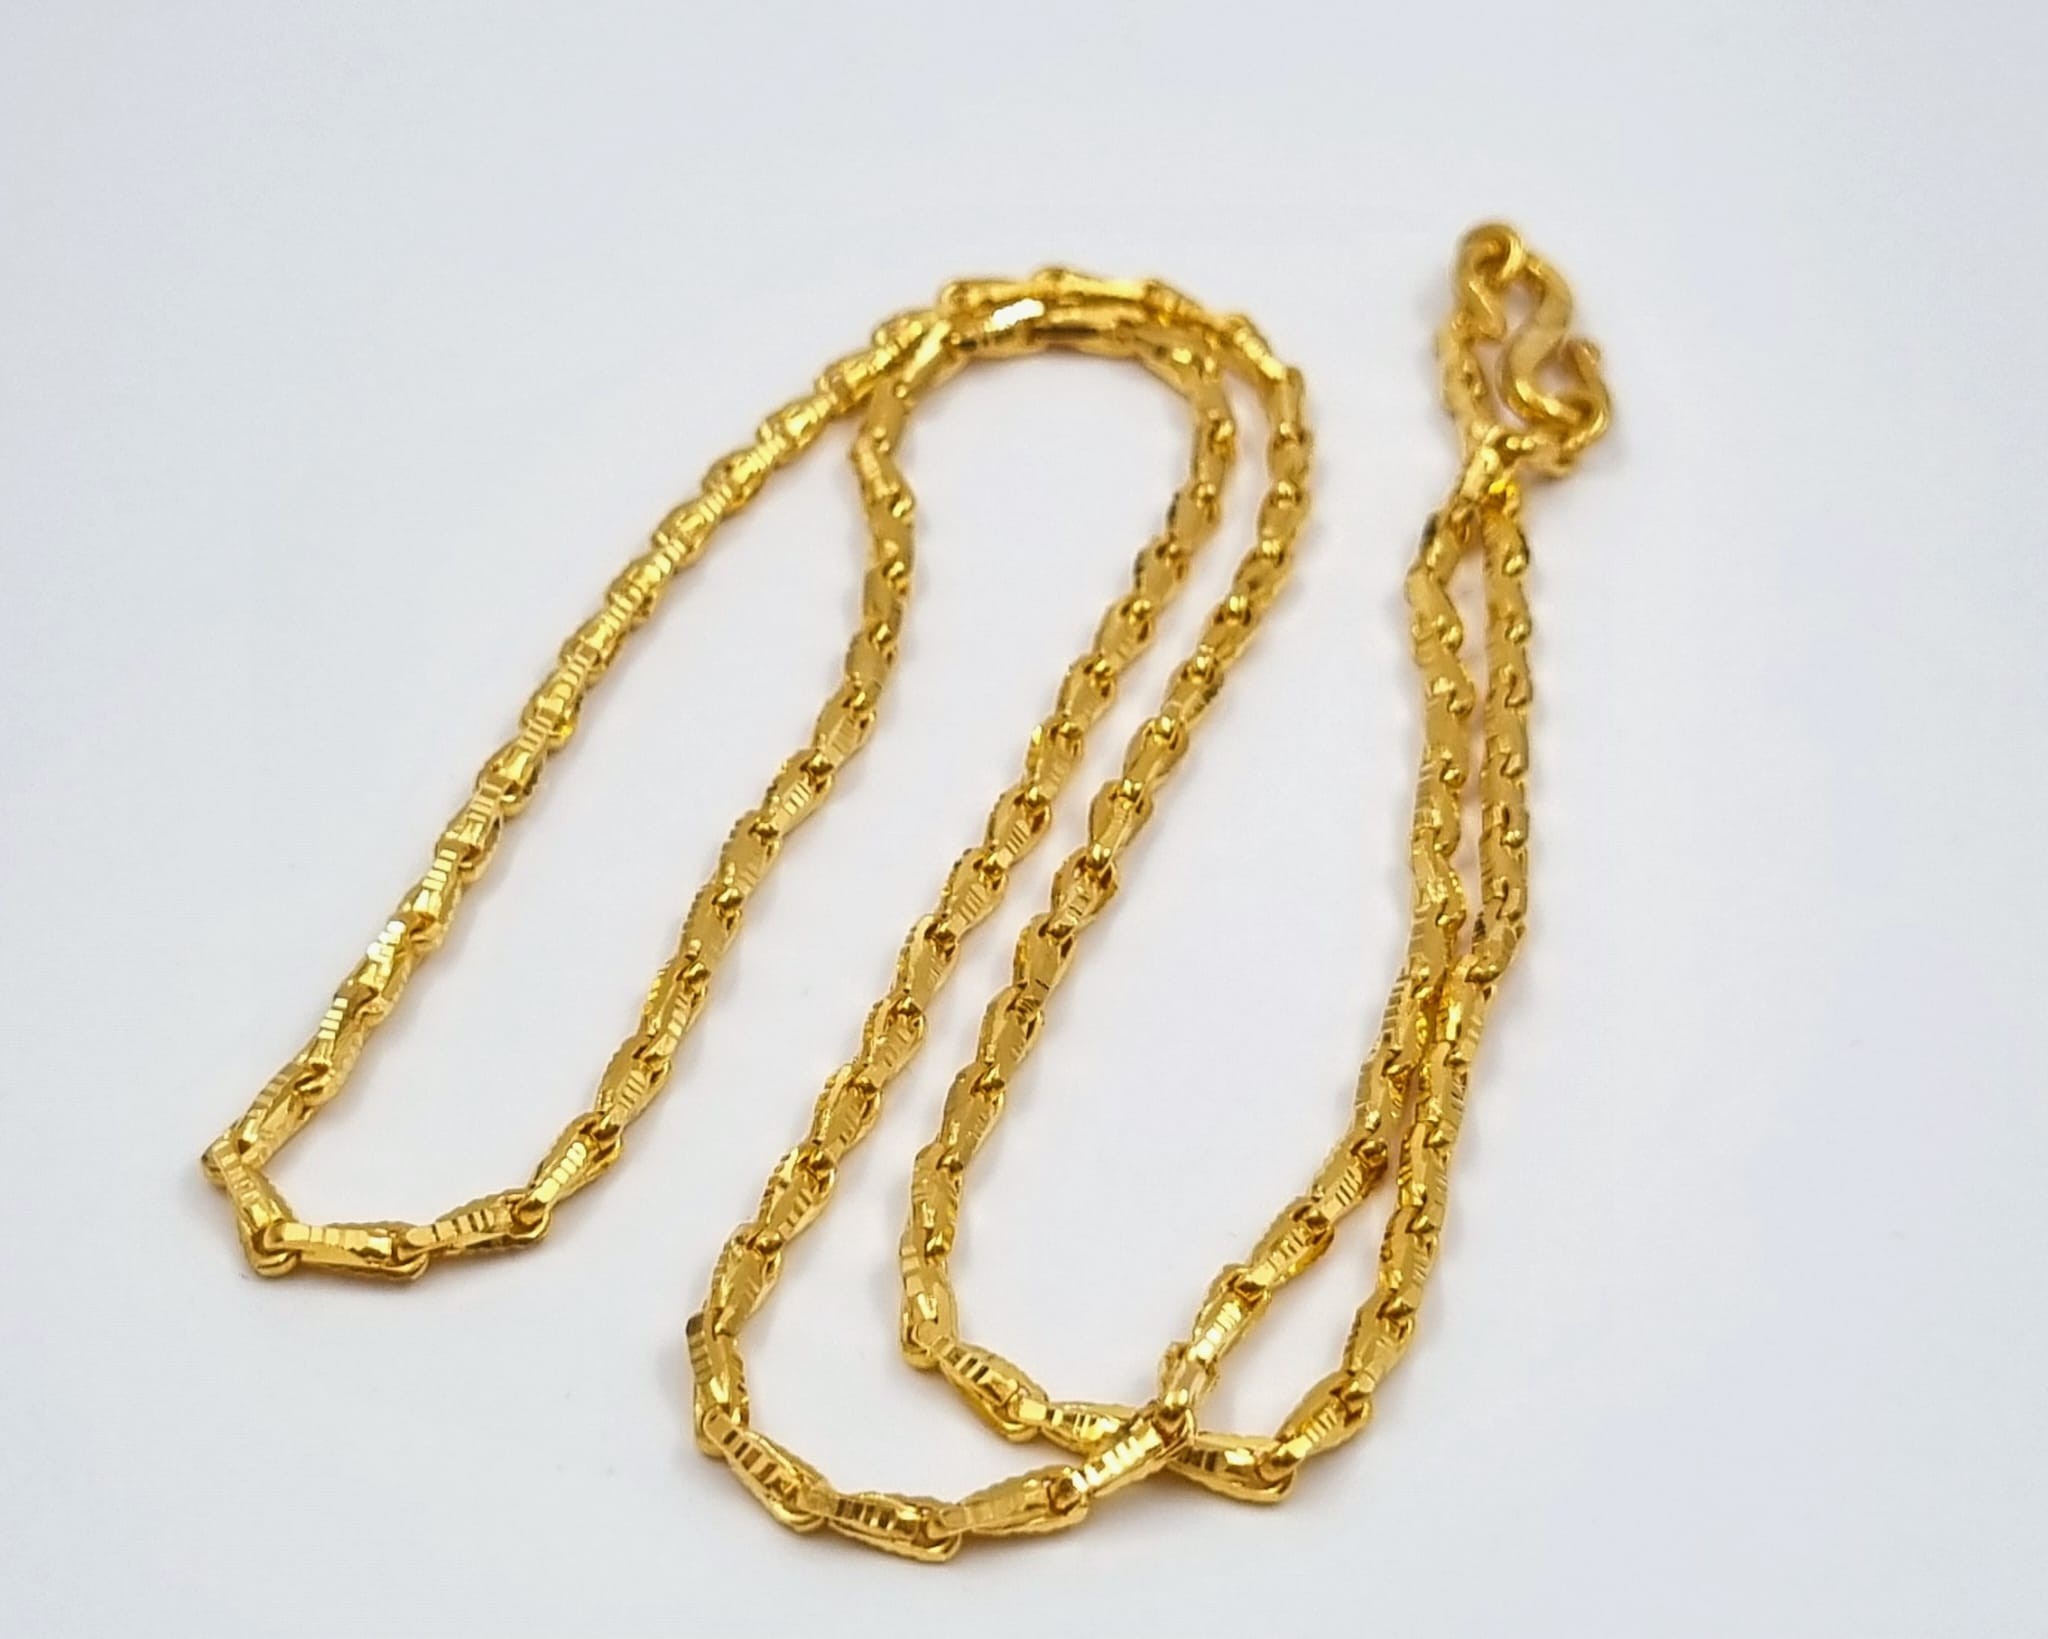 A 22k Yellow Gold Teardrop-Link Chain with S Clasp. 70cm. 53.9g